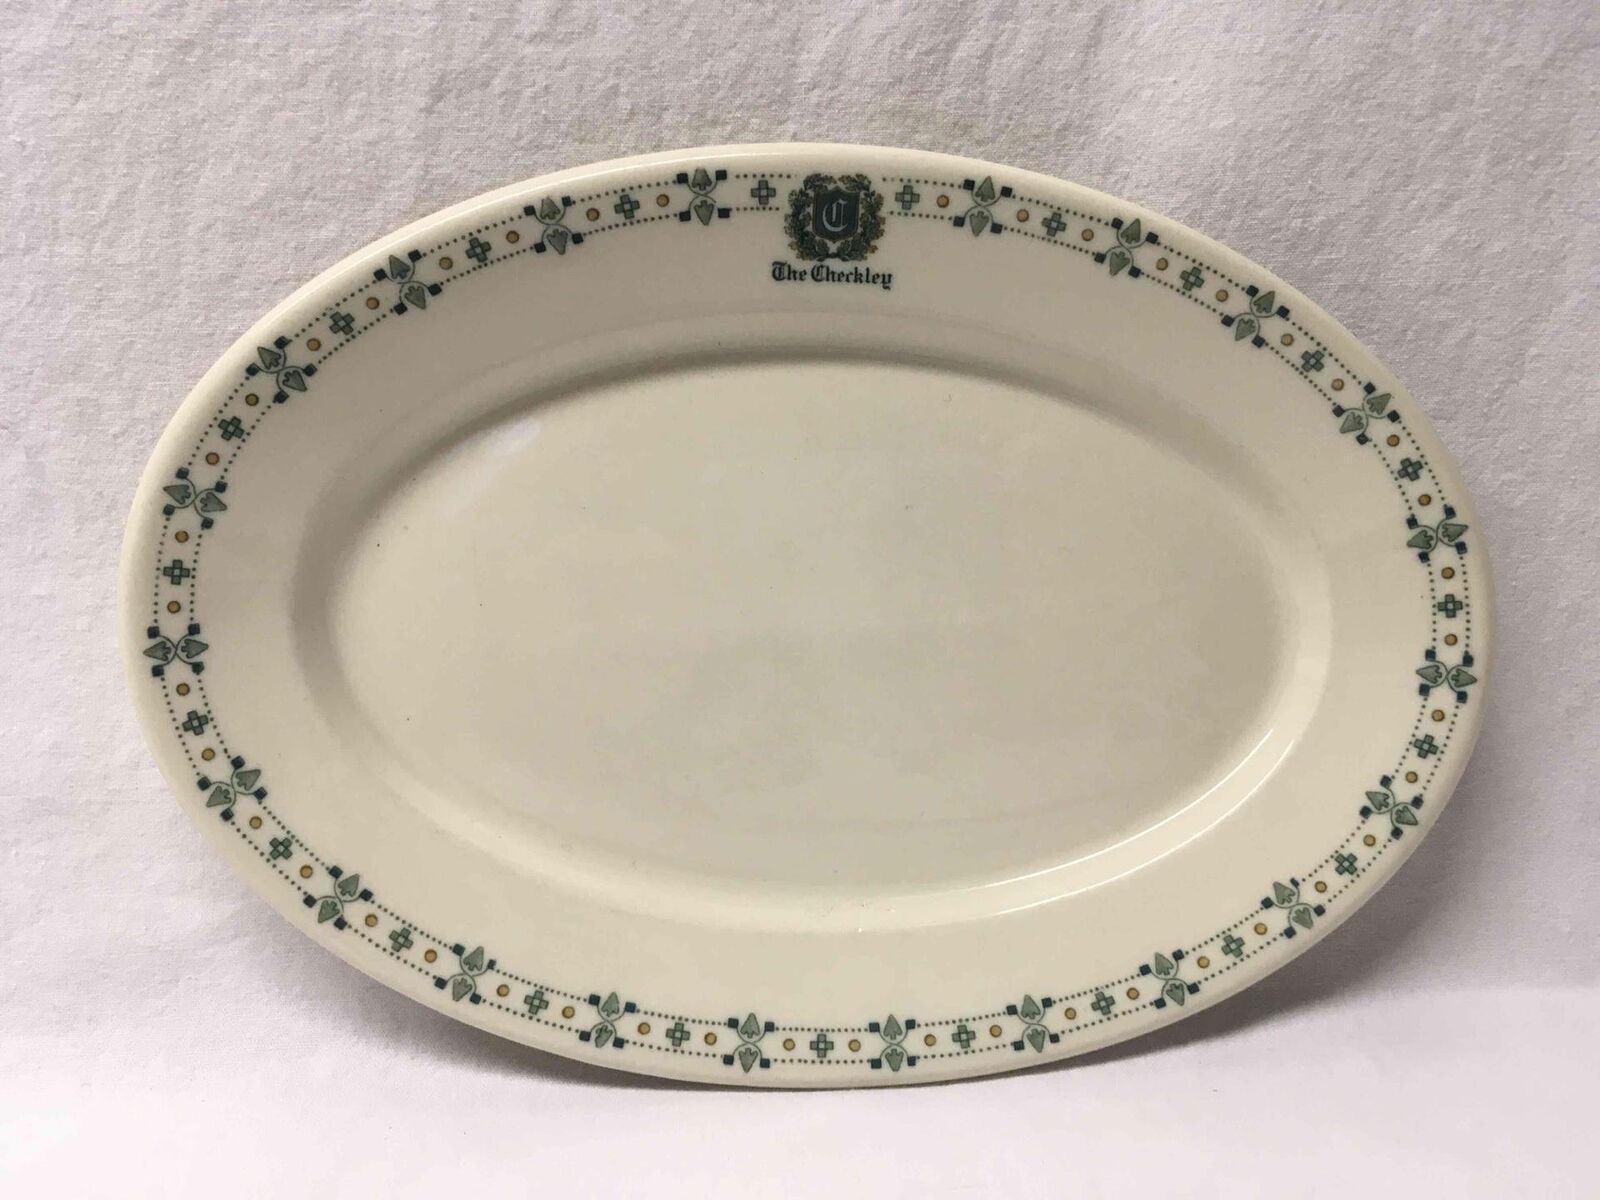 Checkley Hotel Scarborough Maine Plate Restaurant Ware Old Colony Syracuse China